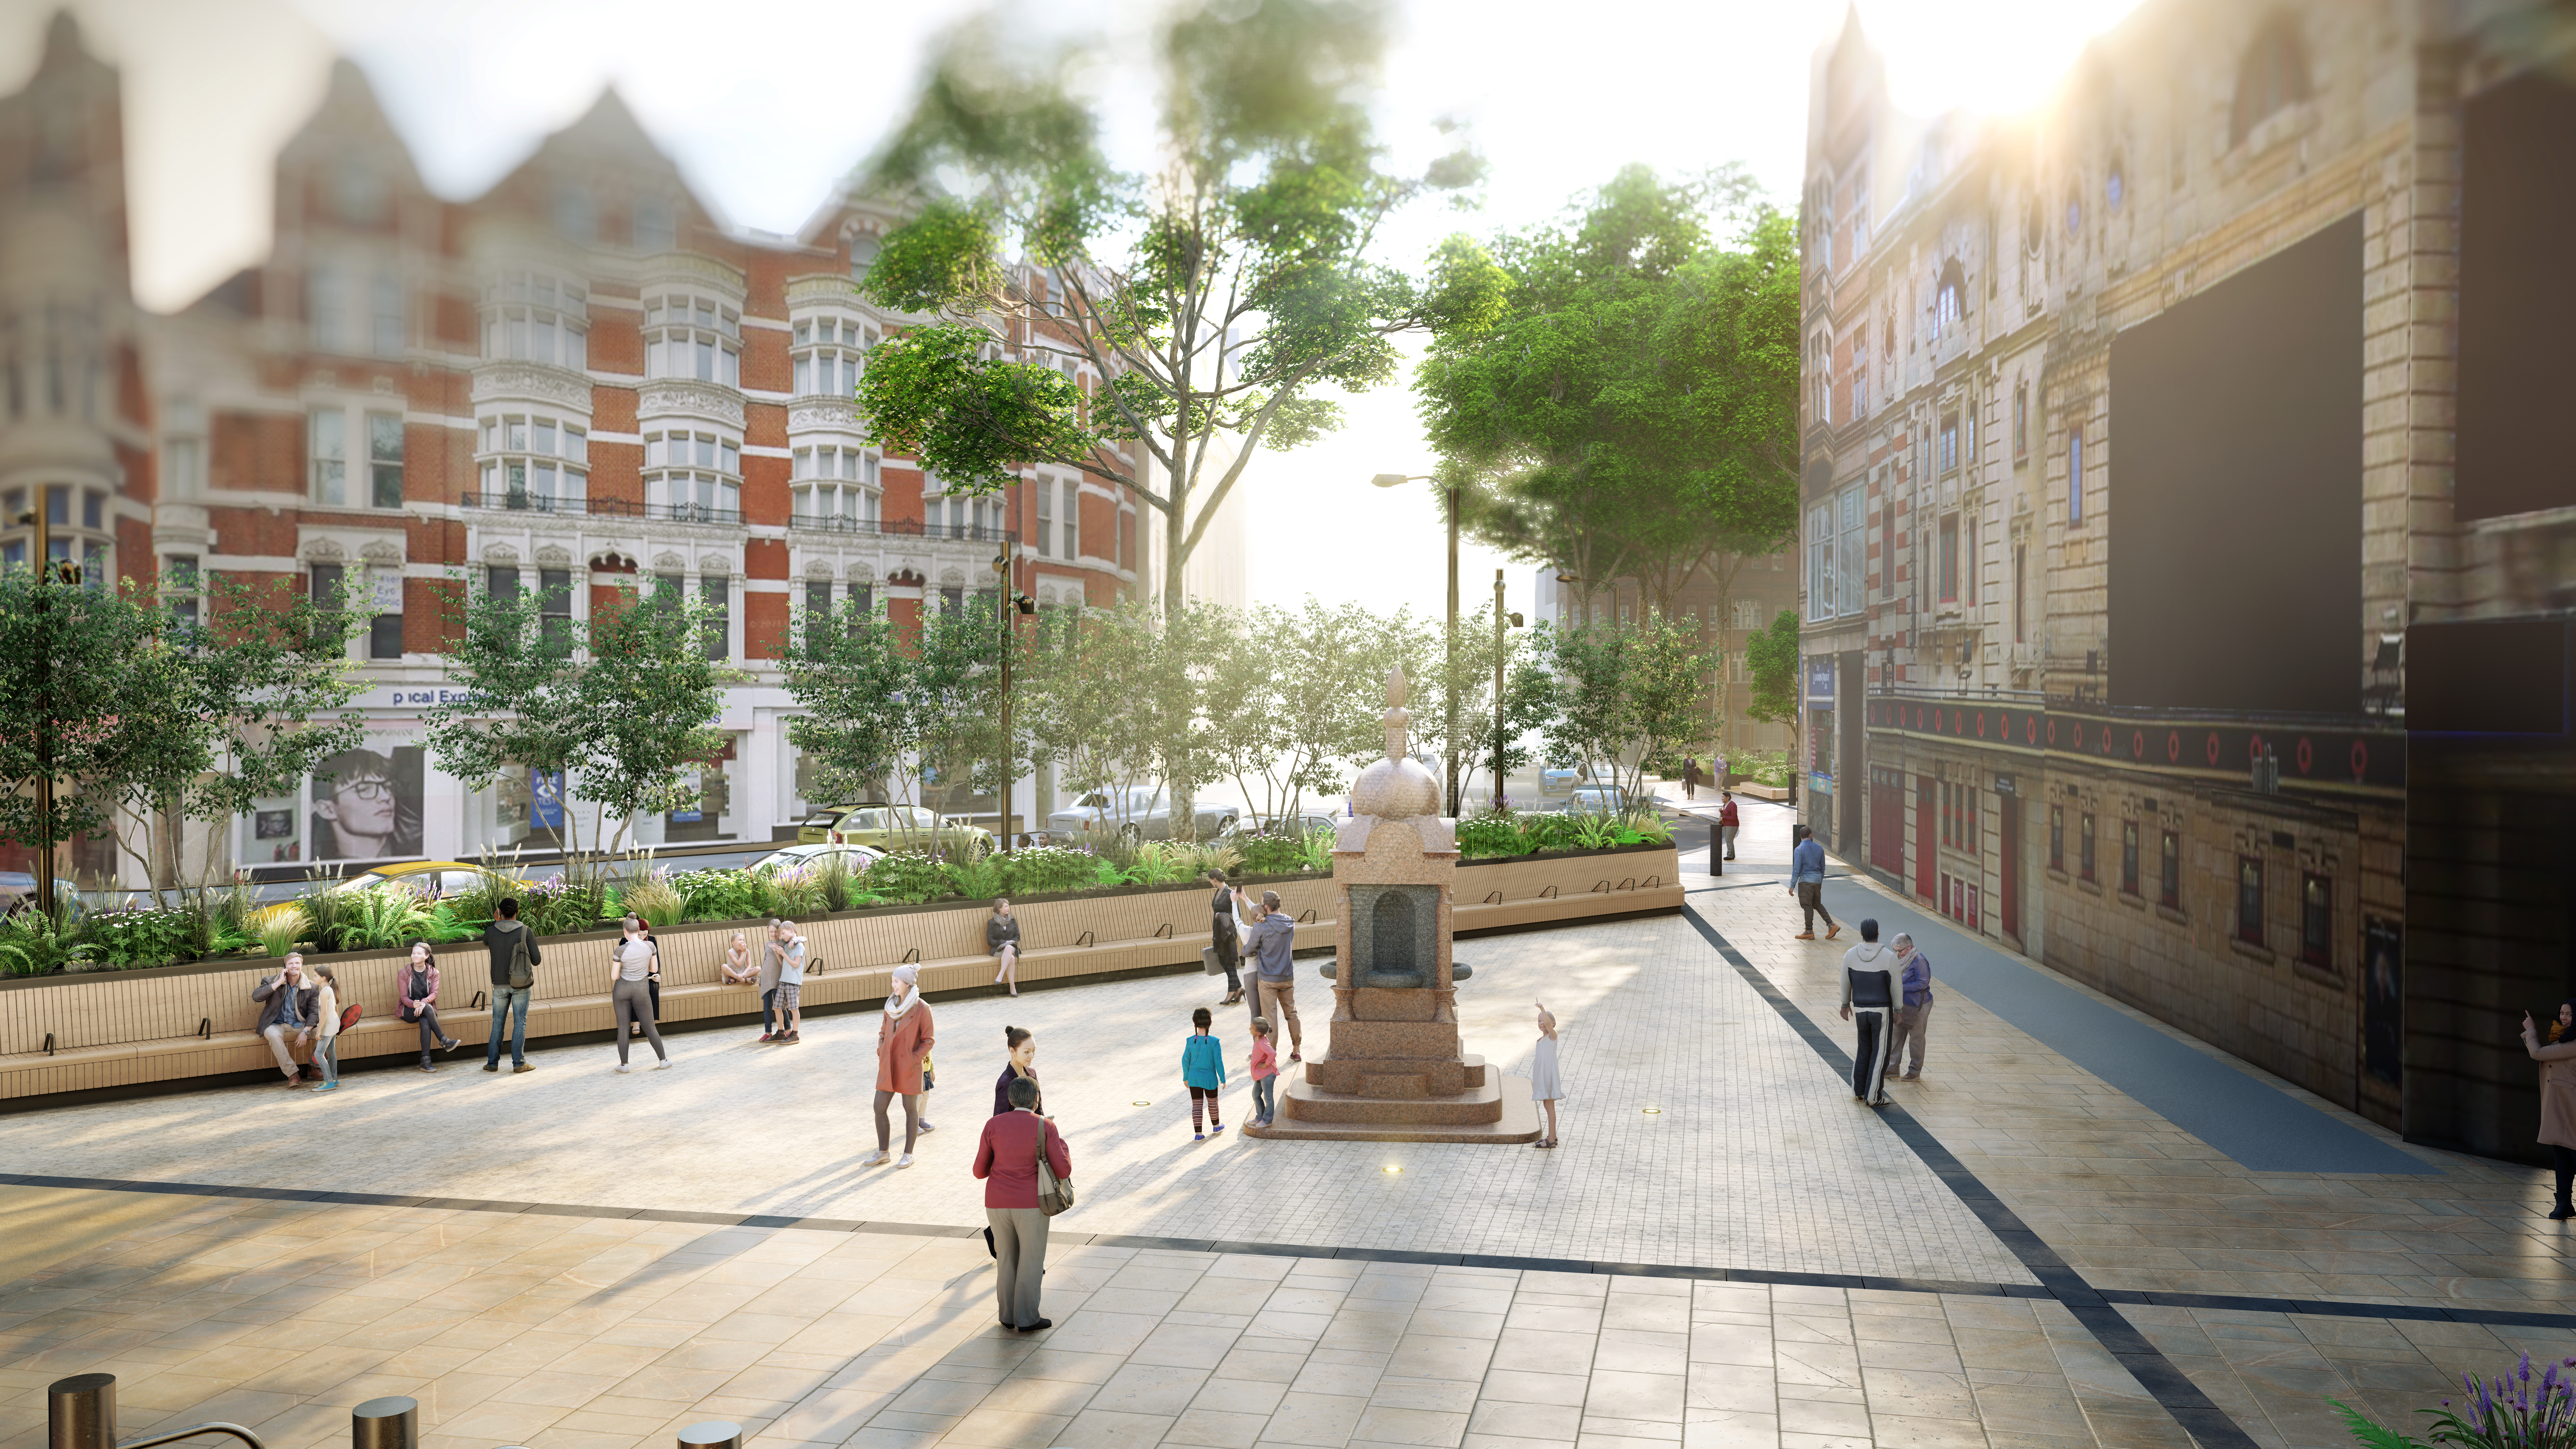 the southern area of PRinces Circus with new planting areas , benches and the restored fountain